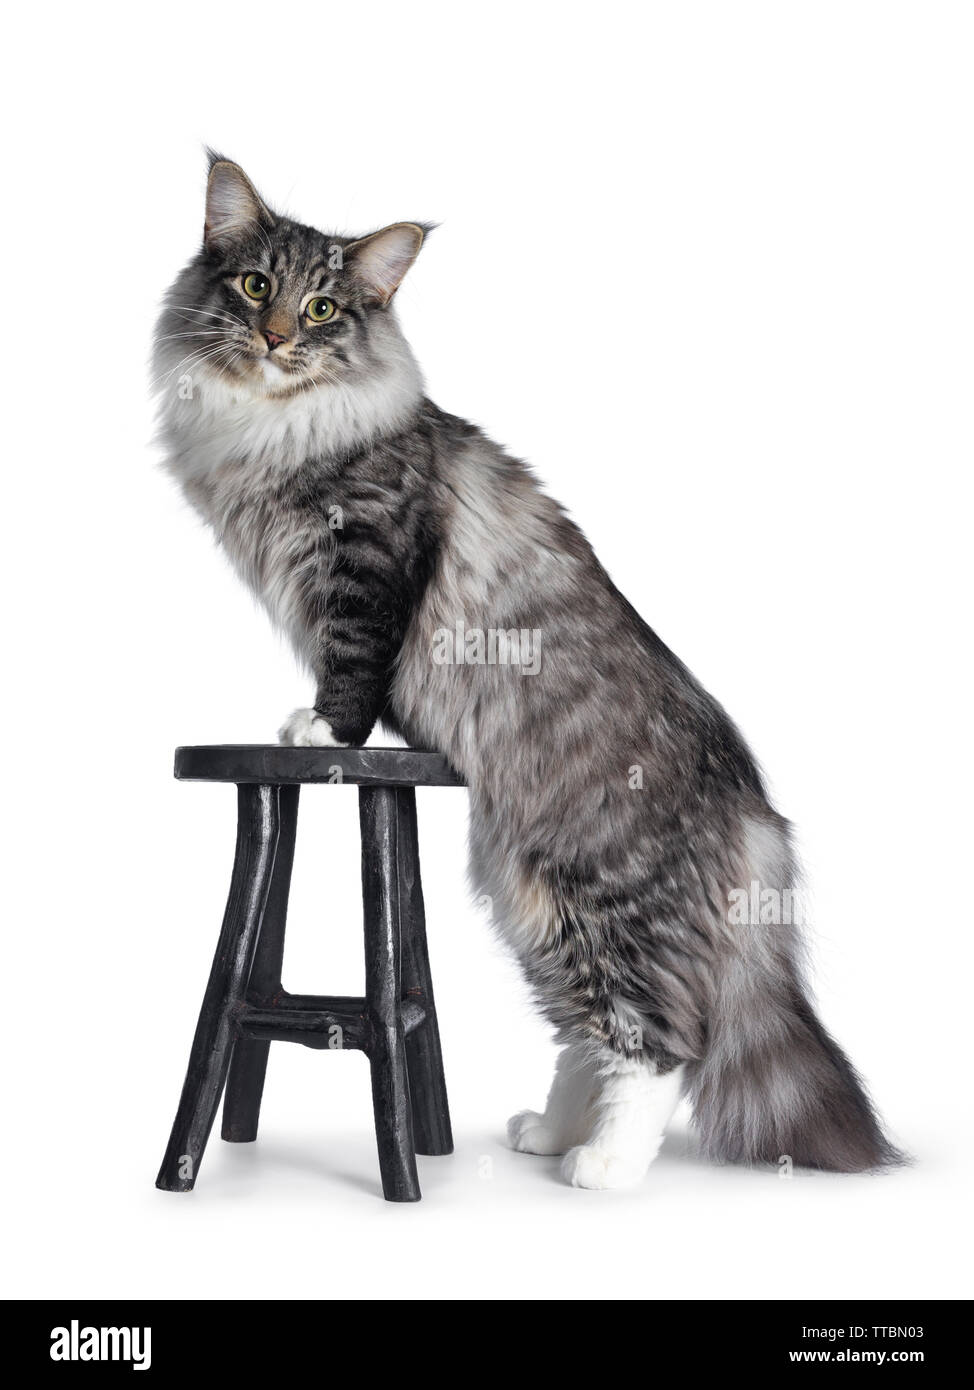 Adorable young Norwegian Forestcat, standing side ways with front paws on stool. Looking curious at lens. Isolated on white background. Stock Photo